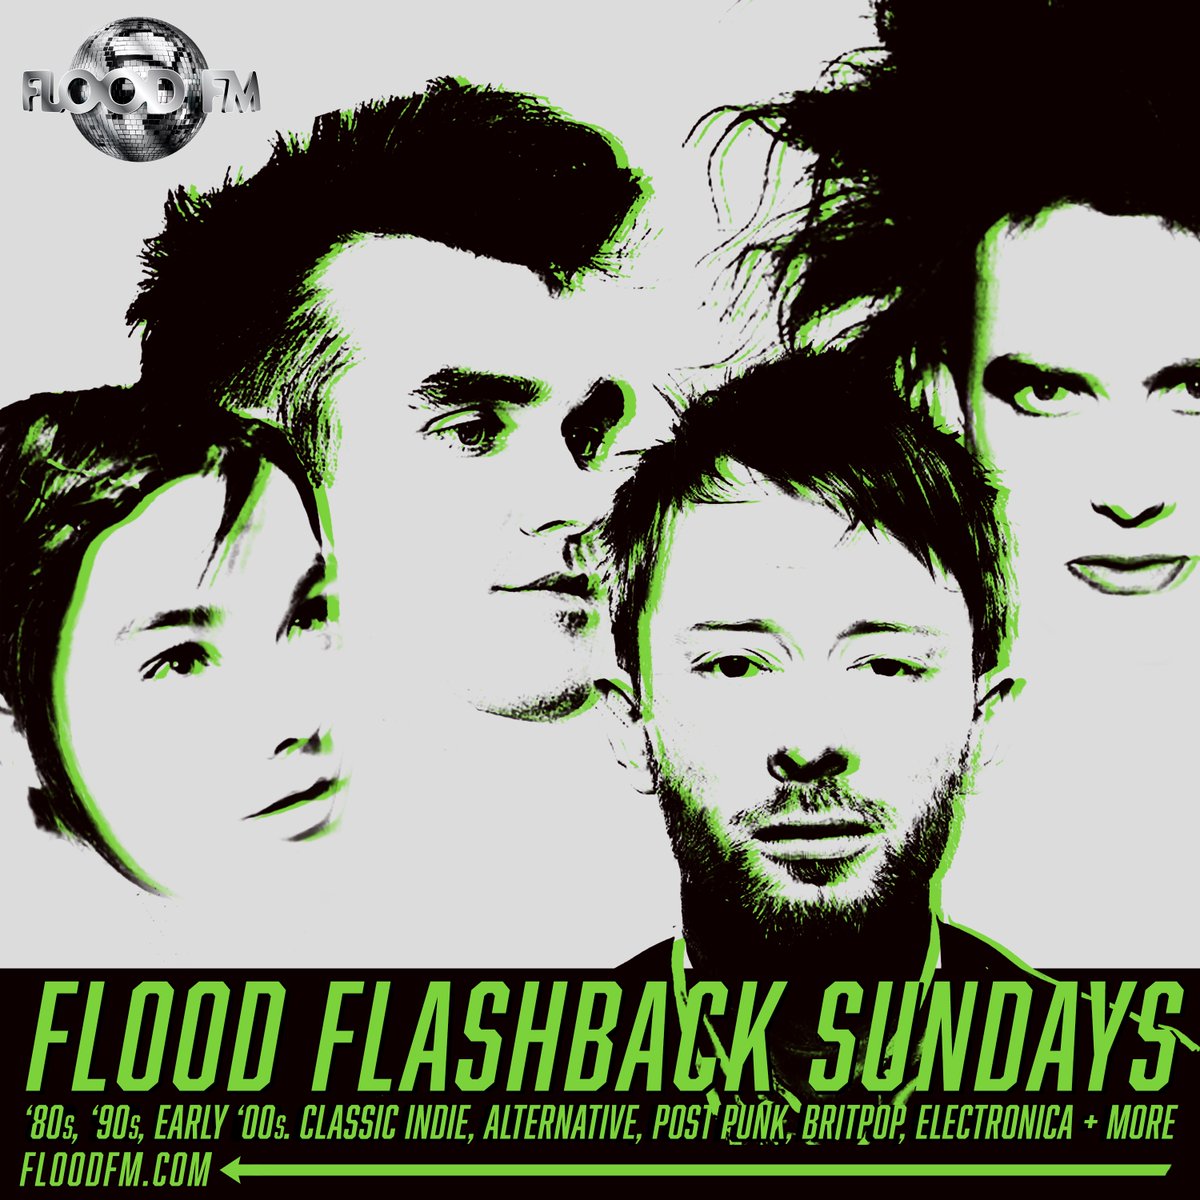 classic indie radio every Sunday on your @FLOODFM 👨‍🎤 🔊 The Smiths 🔊 My Bloody Valentine 🔊 Talking Heads 🔊 The Pixies 🔊 Cocteau Twins 🔊 Pulp 🔊 Kate Bush 🔊 New Order 🔊 Lush 🔊 Psychedelic Furs 🔊 Suede 🔊 Bjork 🔊 Joy Division 🔊 Ramones And much more! @floodmagazine